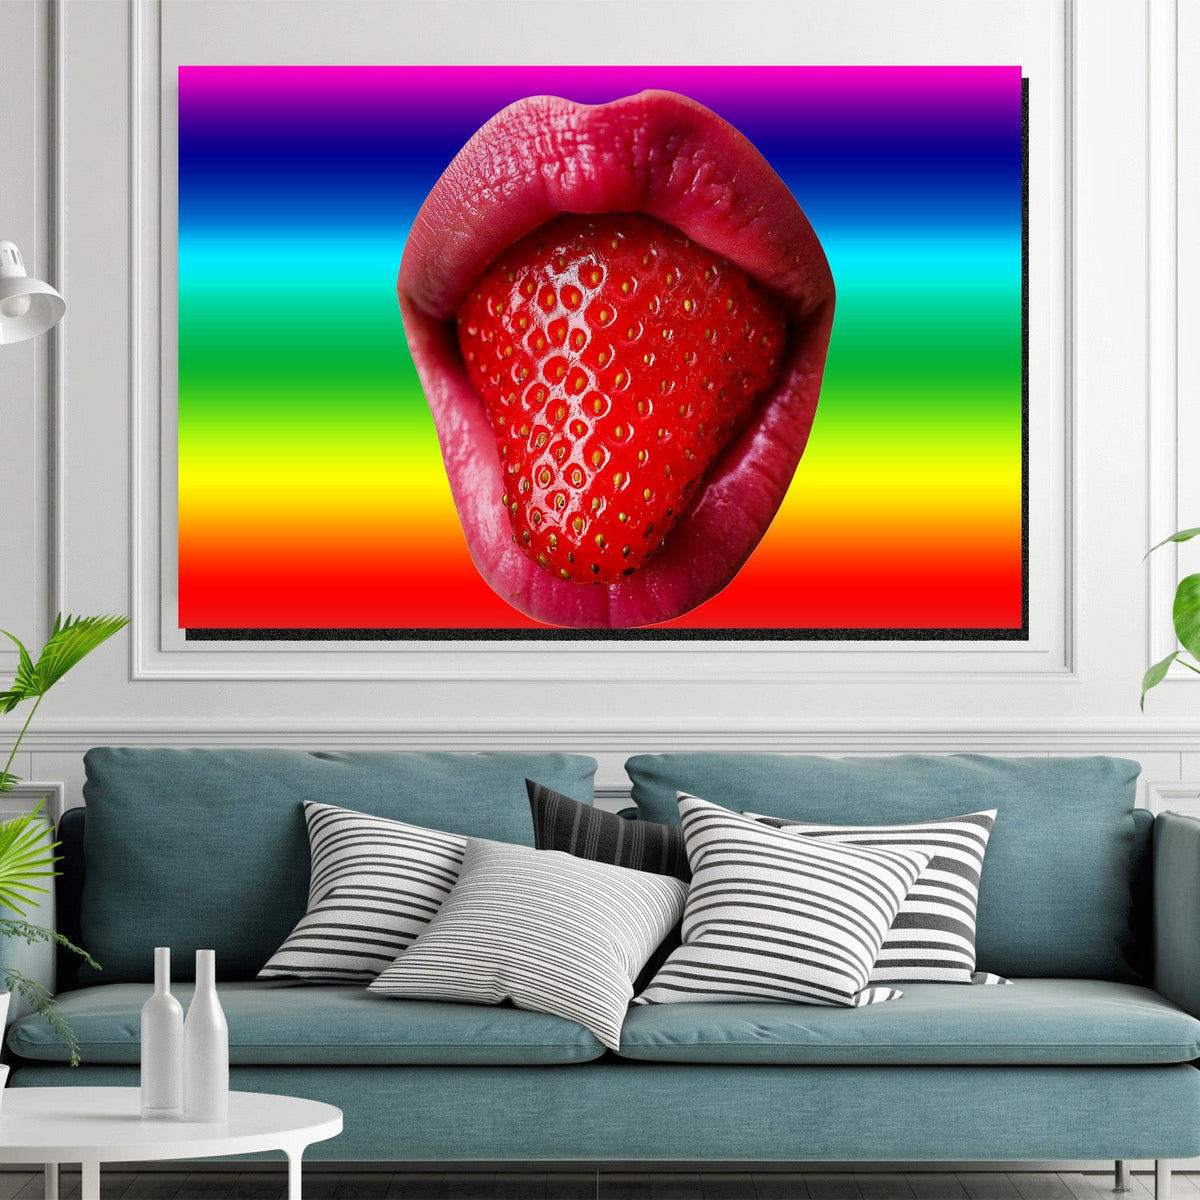 https://cdn.shopify.com/s/files/1/0387/9986/8044/products/MouthfulofStrawberryCanvasArtprintStretched-1.jpg